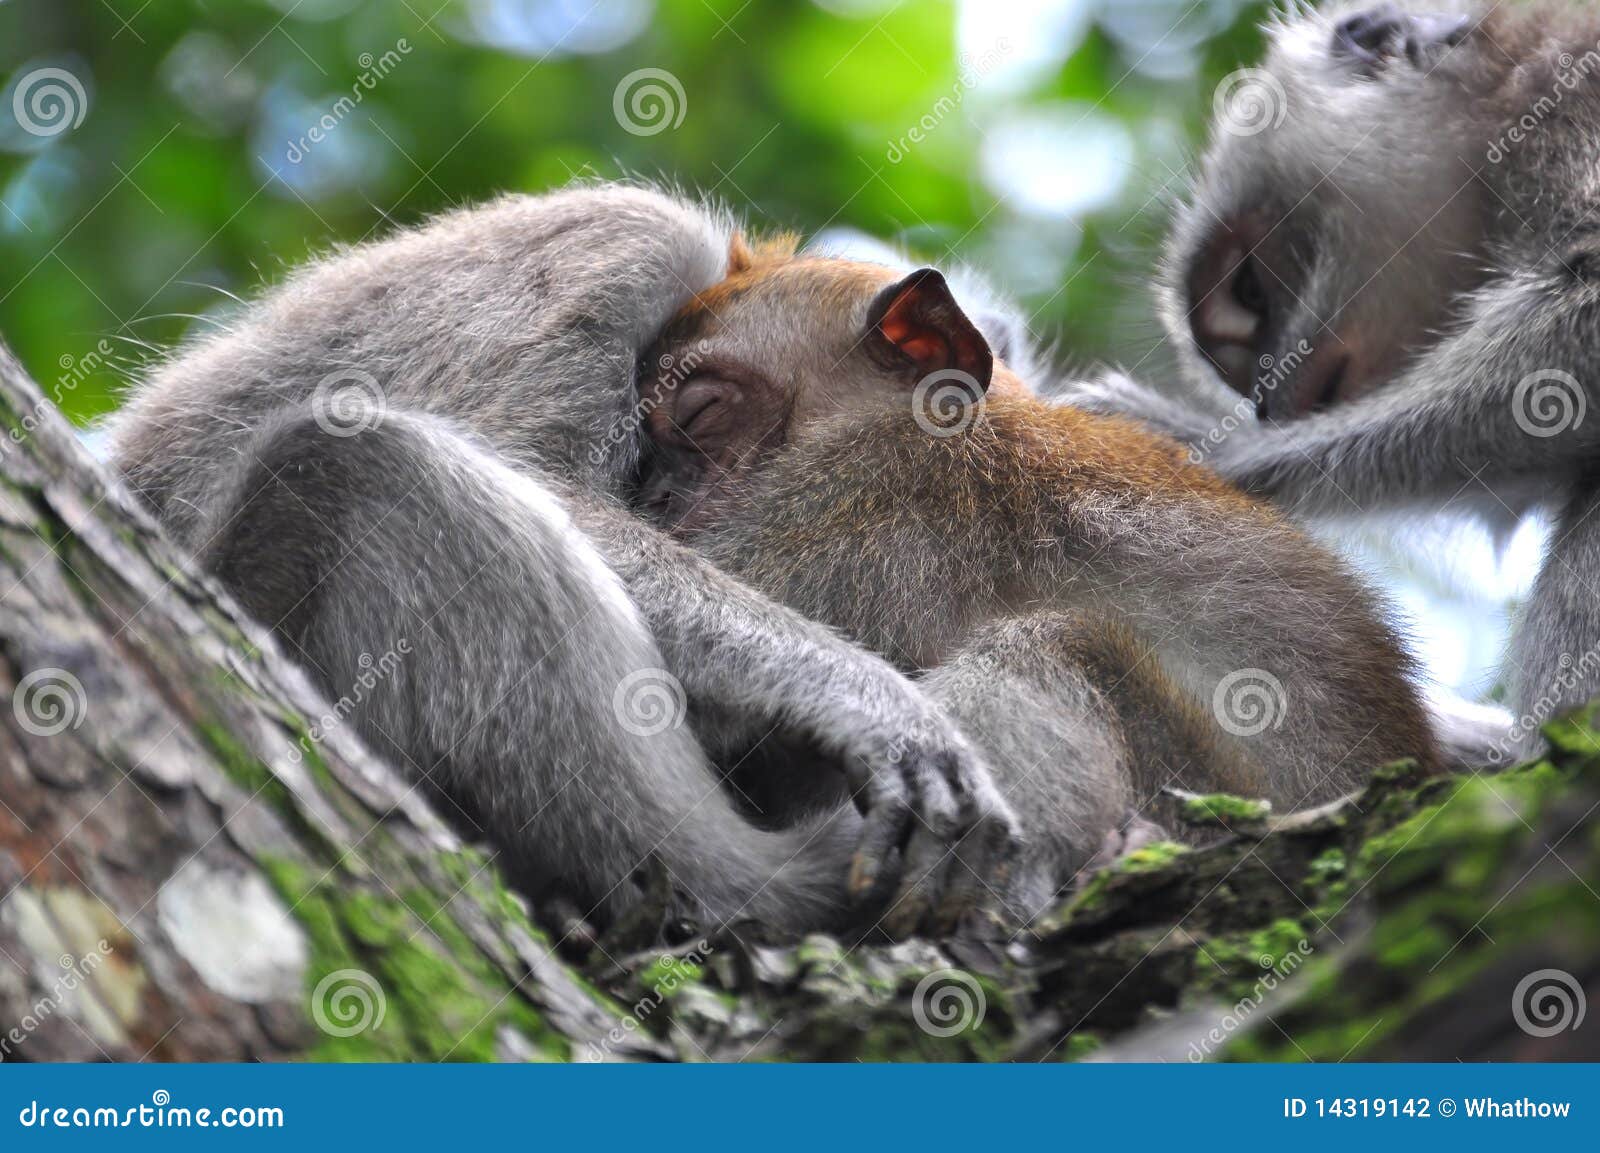 baby monkey sleeping soundly in mother's bossom